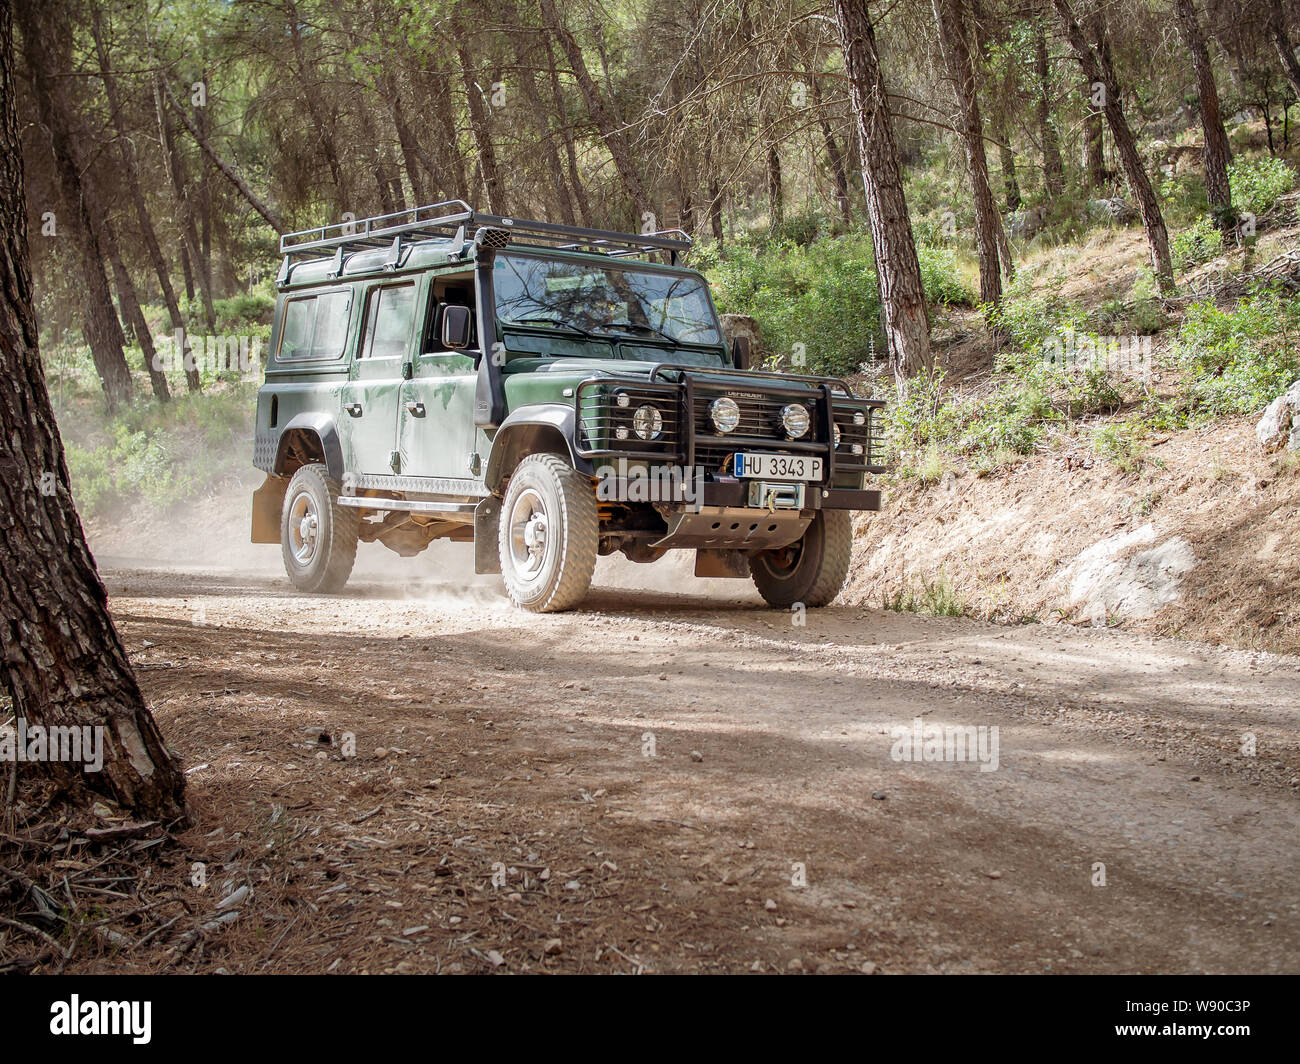 MONTFALCO, SPAIN-AUGUST 12, 2019: Green Land Rover Defender 110 riding a dusty forest road Stock Photo